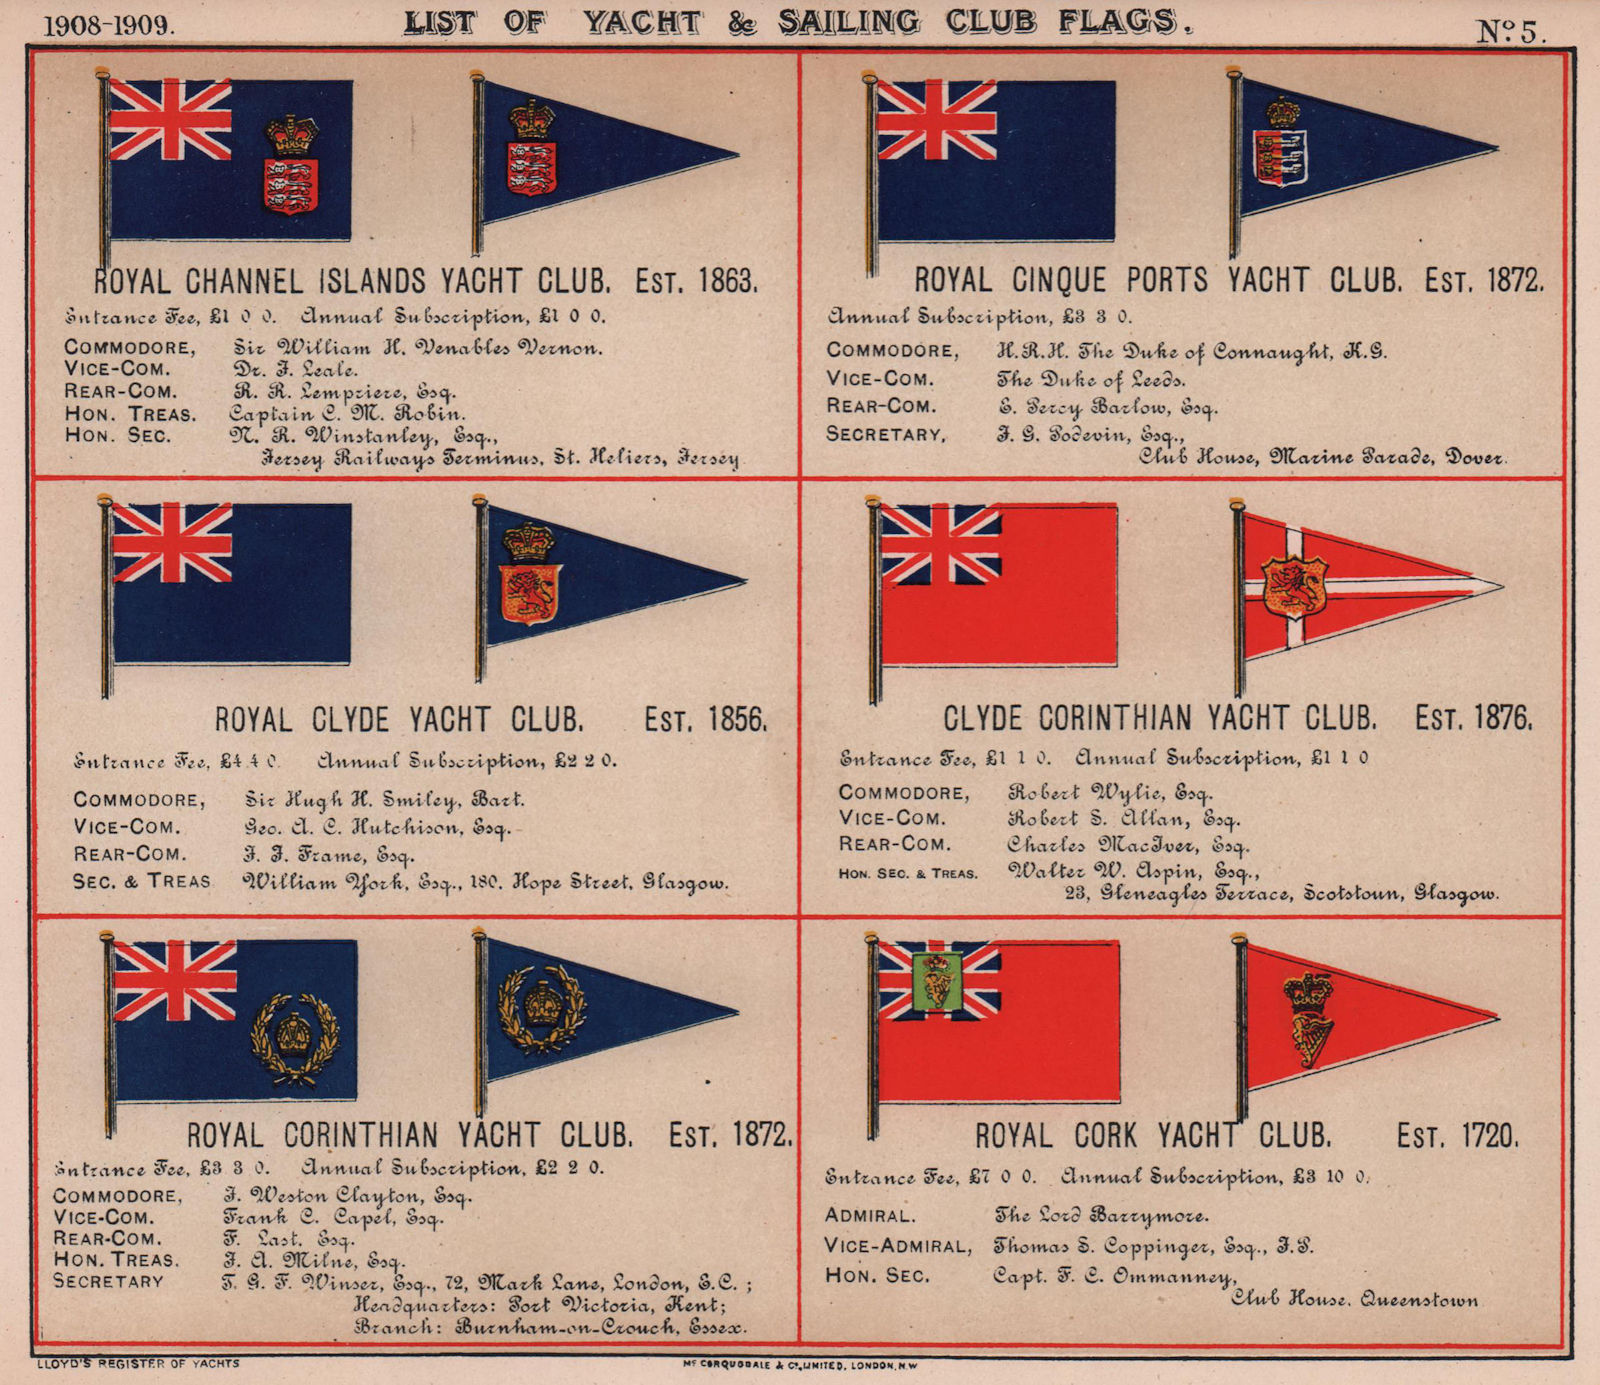 Associate Product ROYAL YACHT & SAILING CLUB FLAGS C Channel Islands Cinque Ports Clyde Cork 1908